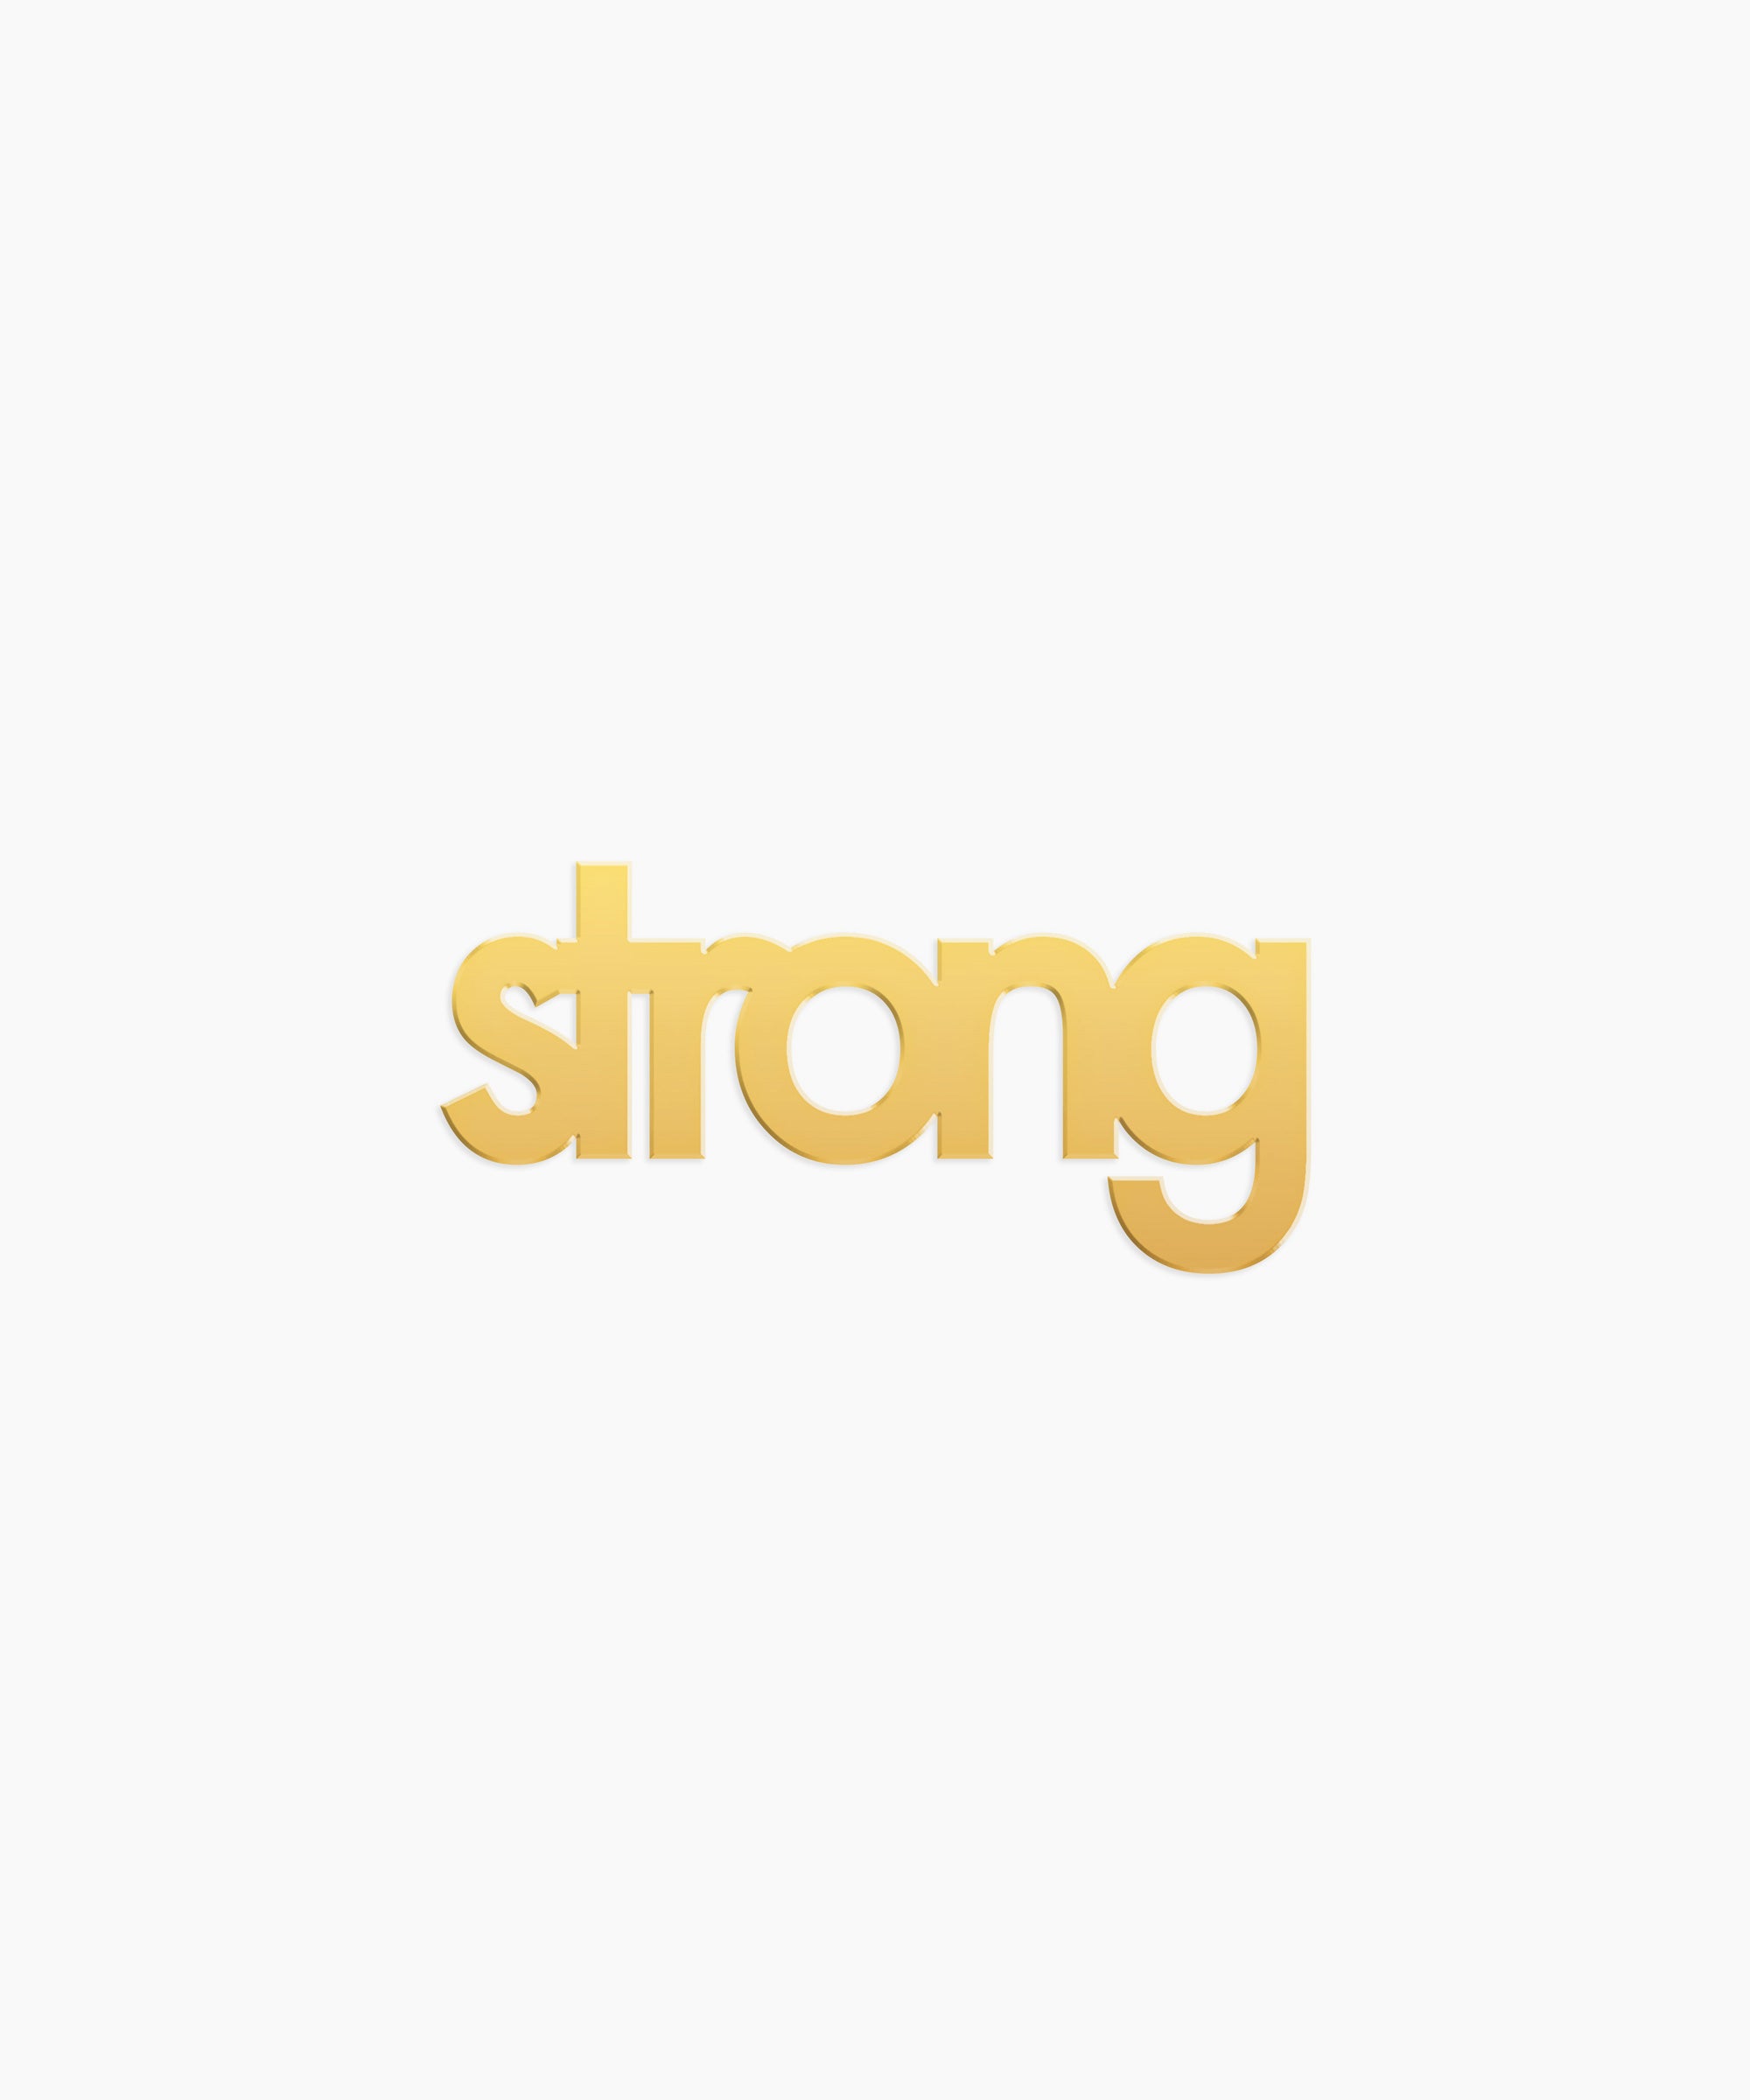 Strong Word Charm - High Quality, Affordable, Empowering, Self Love, Mantra Individual Charm for a Custom Locket - Available in Gold and Silver - Made in USA - Brevity Jewelry